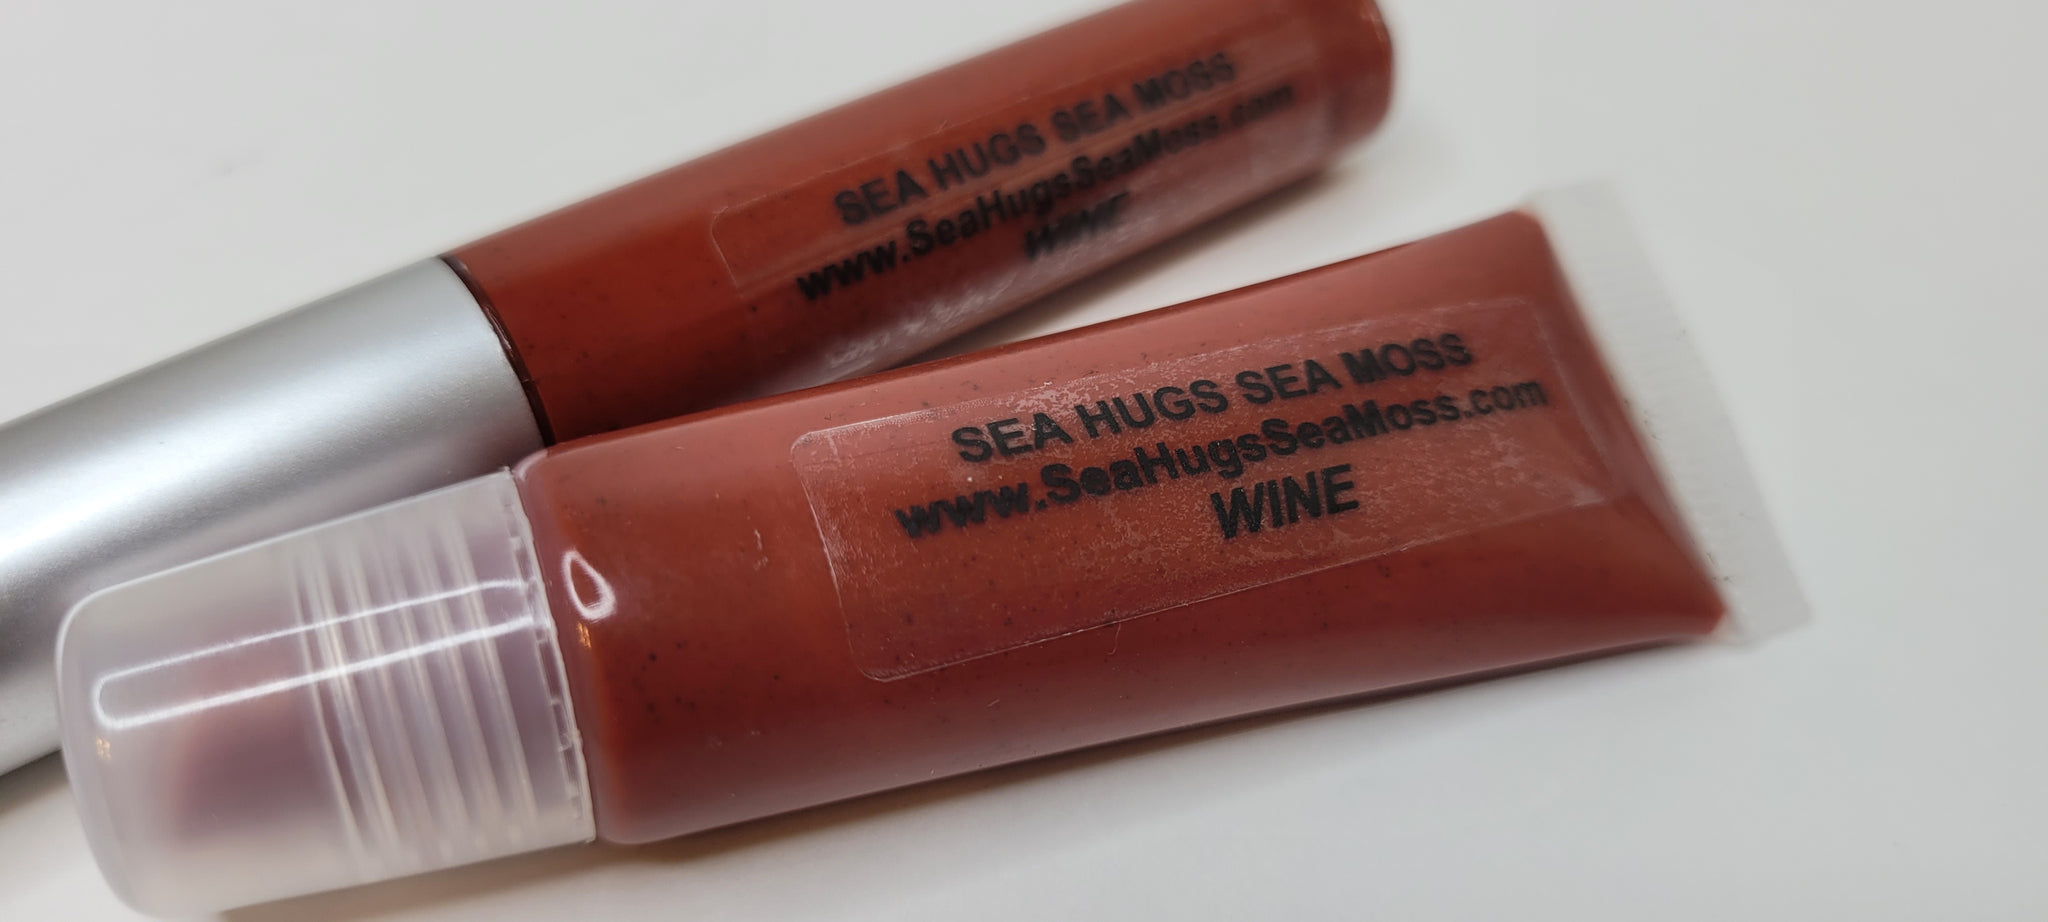 Highly Concentrated Liquid Color Pigment Colorants for Lip Gloss Makin –  Sea Hugs Sea Moss